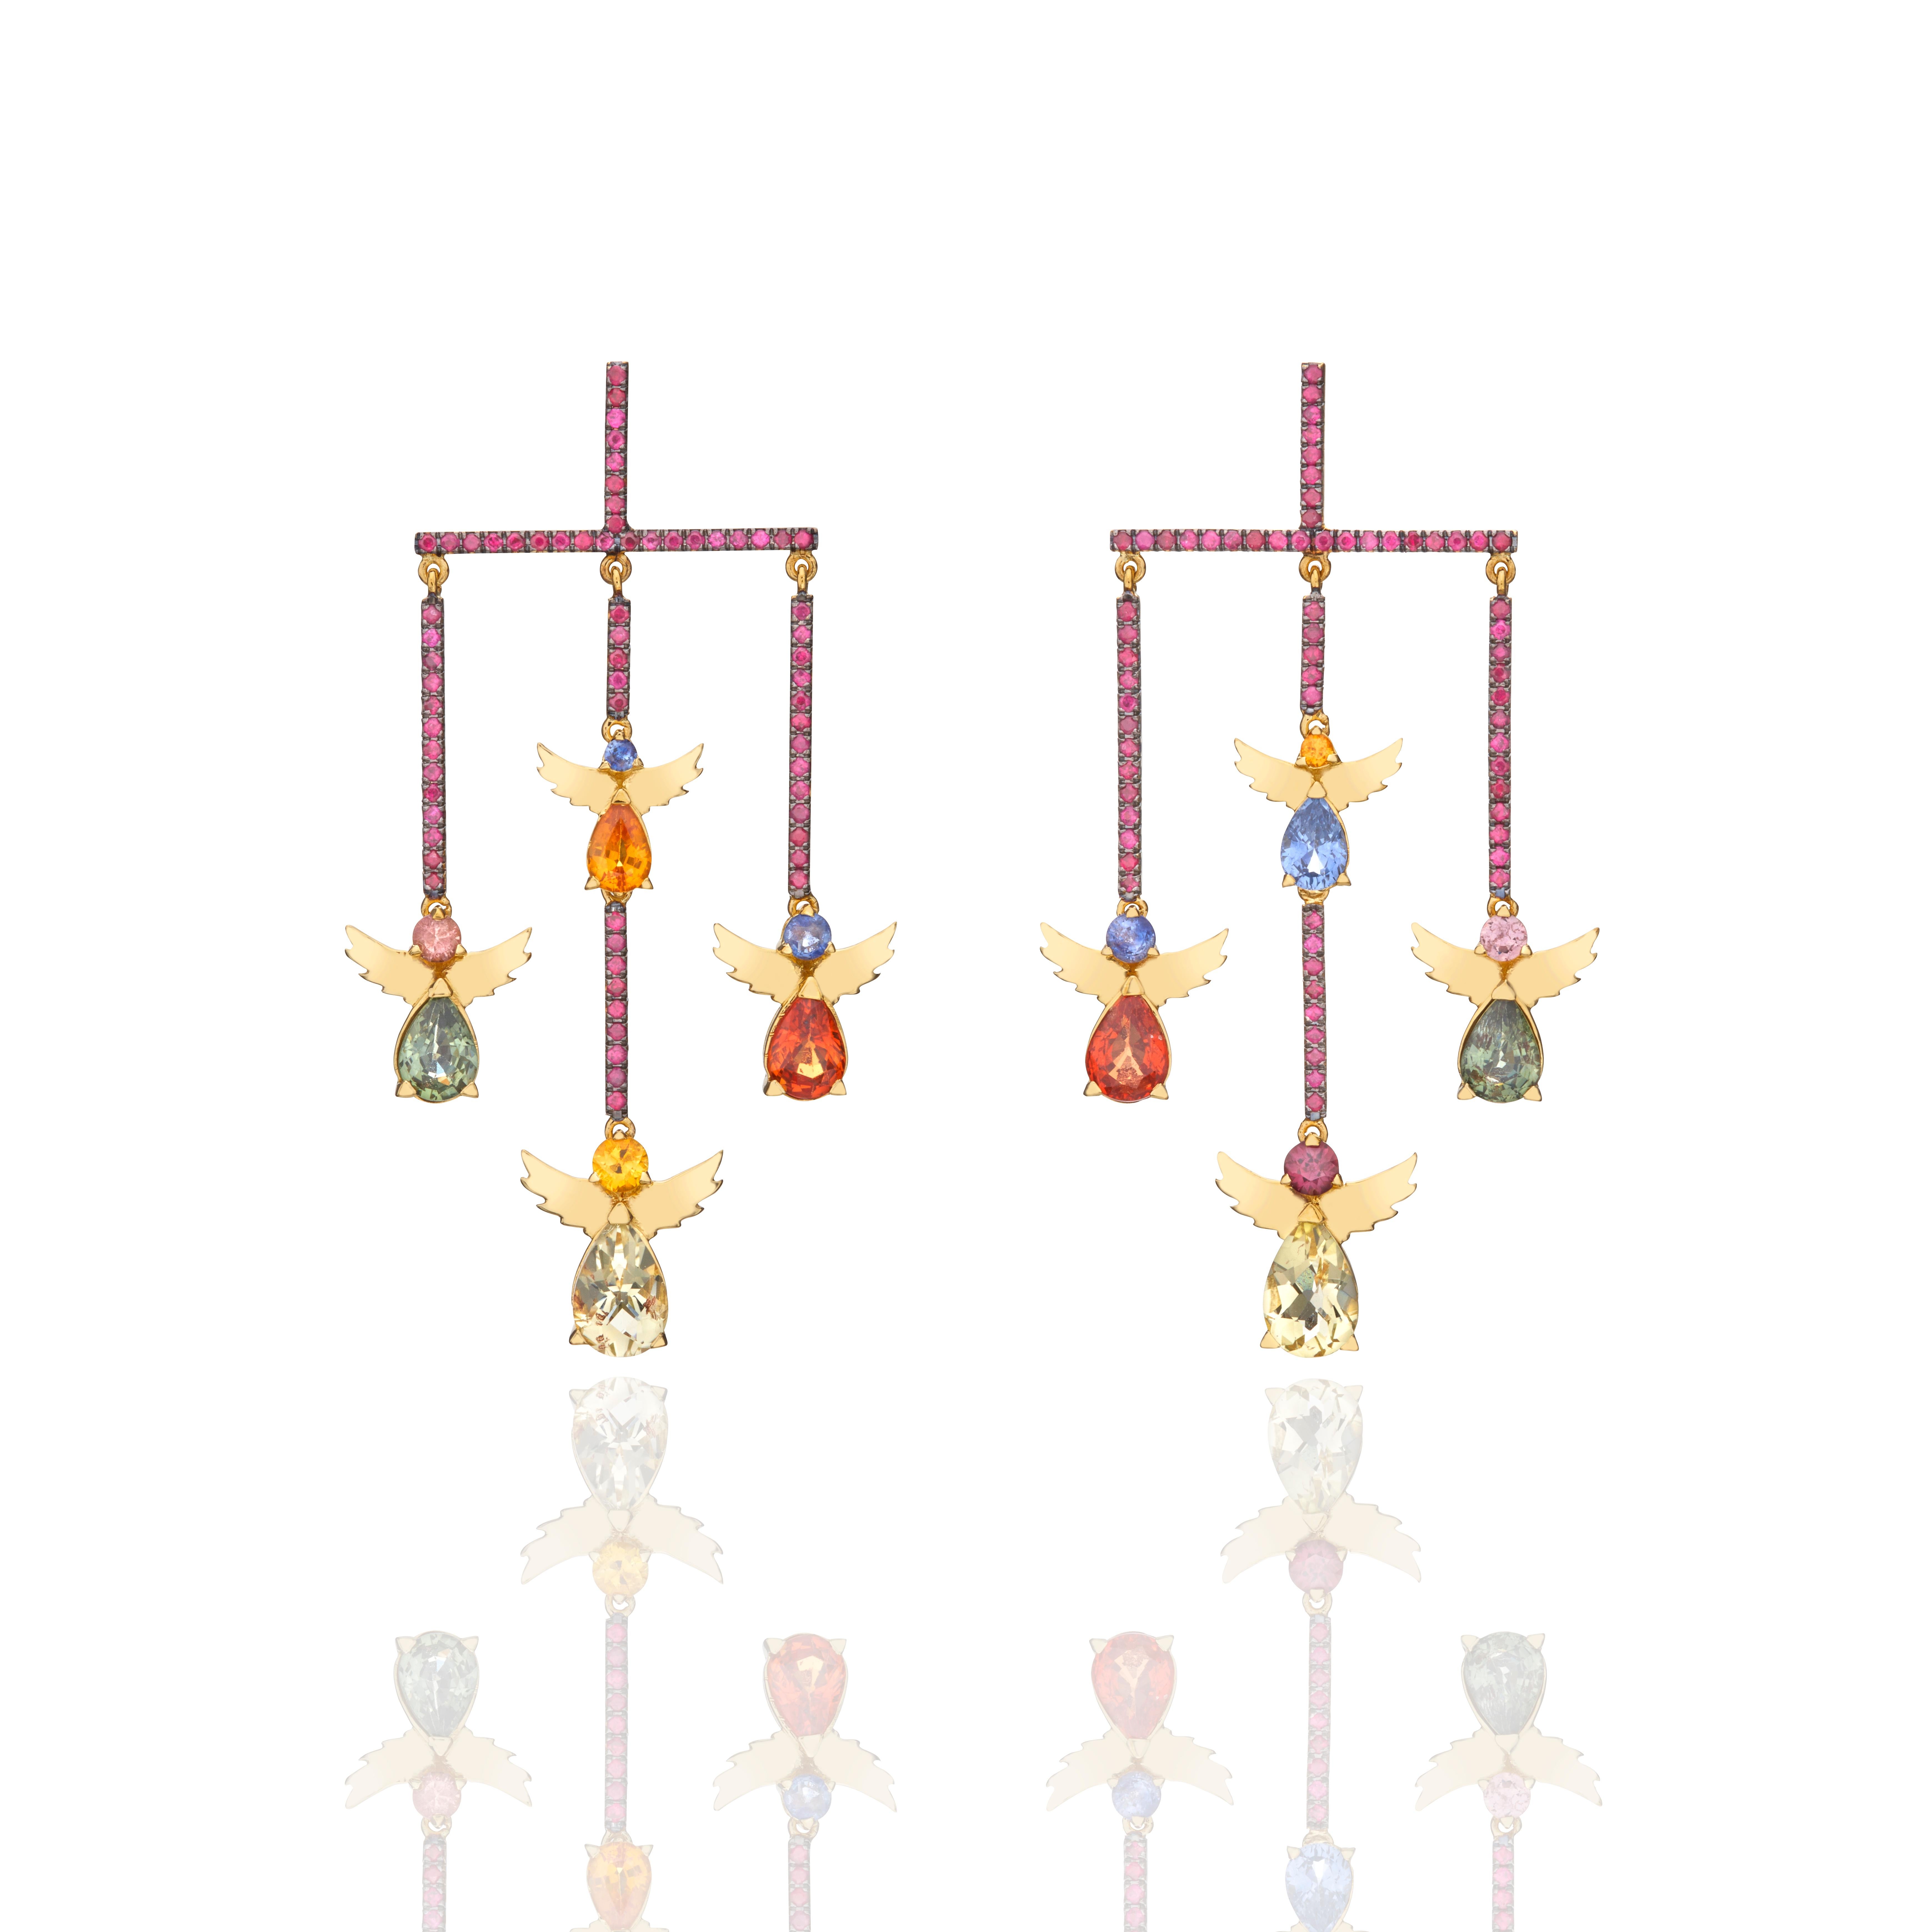 Modern Chandelier 18kt yellow gold earrings set with rubies, lemon citrine and coloured sapphires. 
Another unique design of the Angels Collection.
The Falling Angels earrings come from the brand Nicofilimon, a brand based in Greece. It's lead